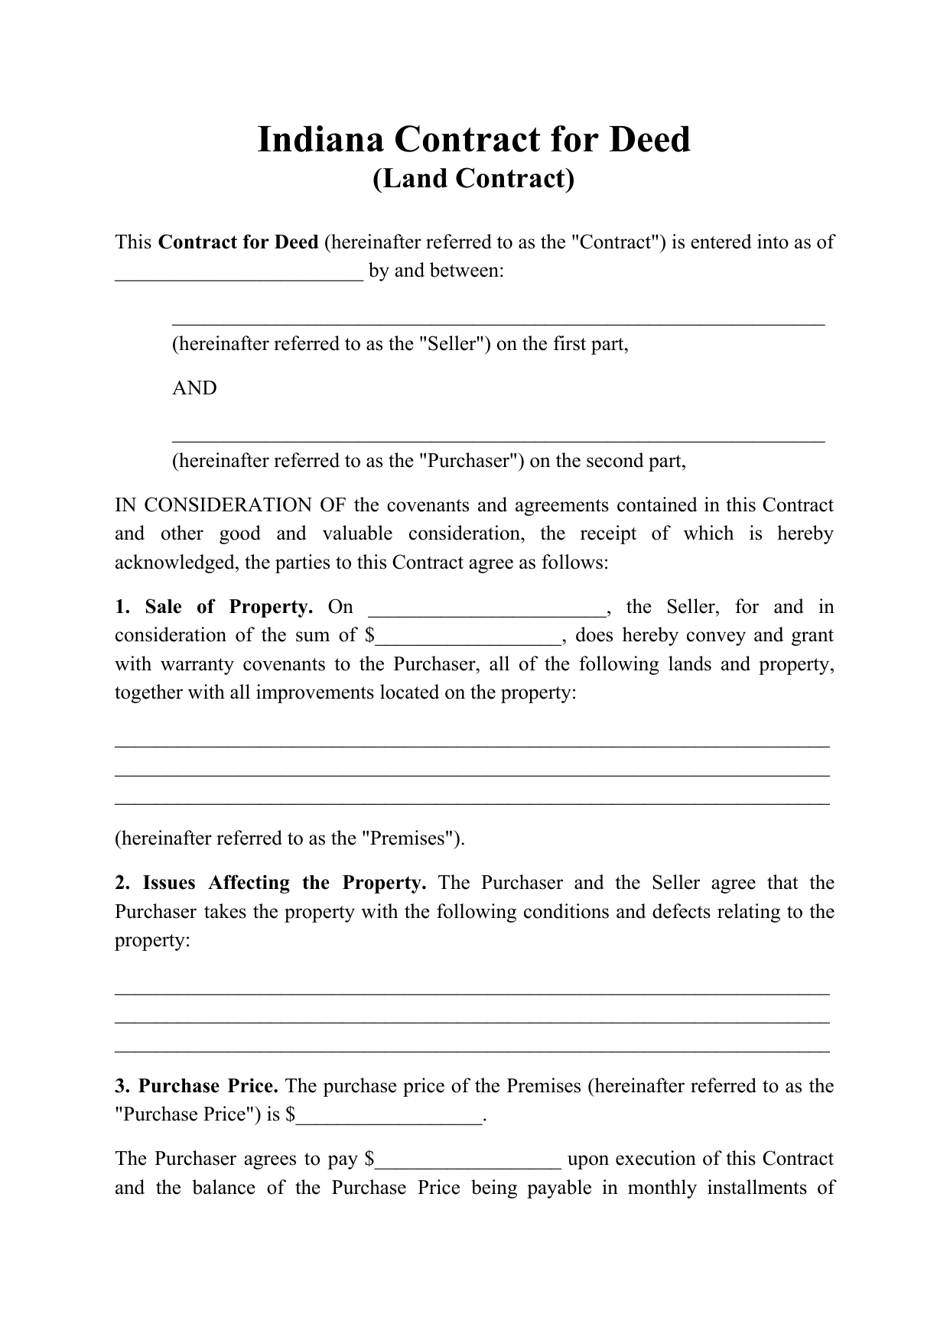 Contract for Deed (Land Contract) - Indiana, Page 1